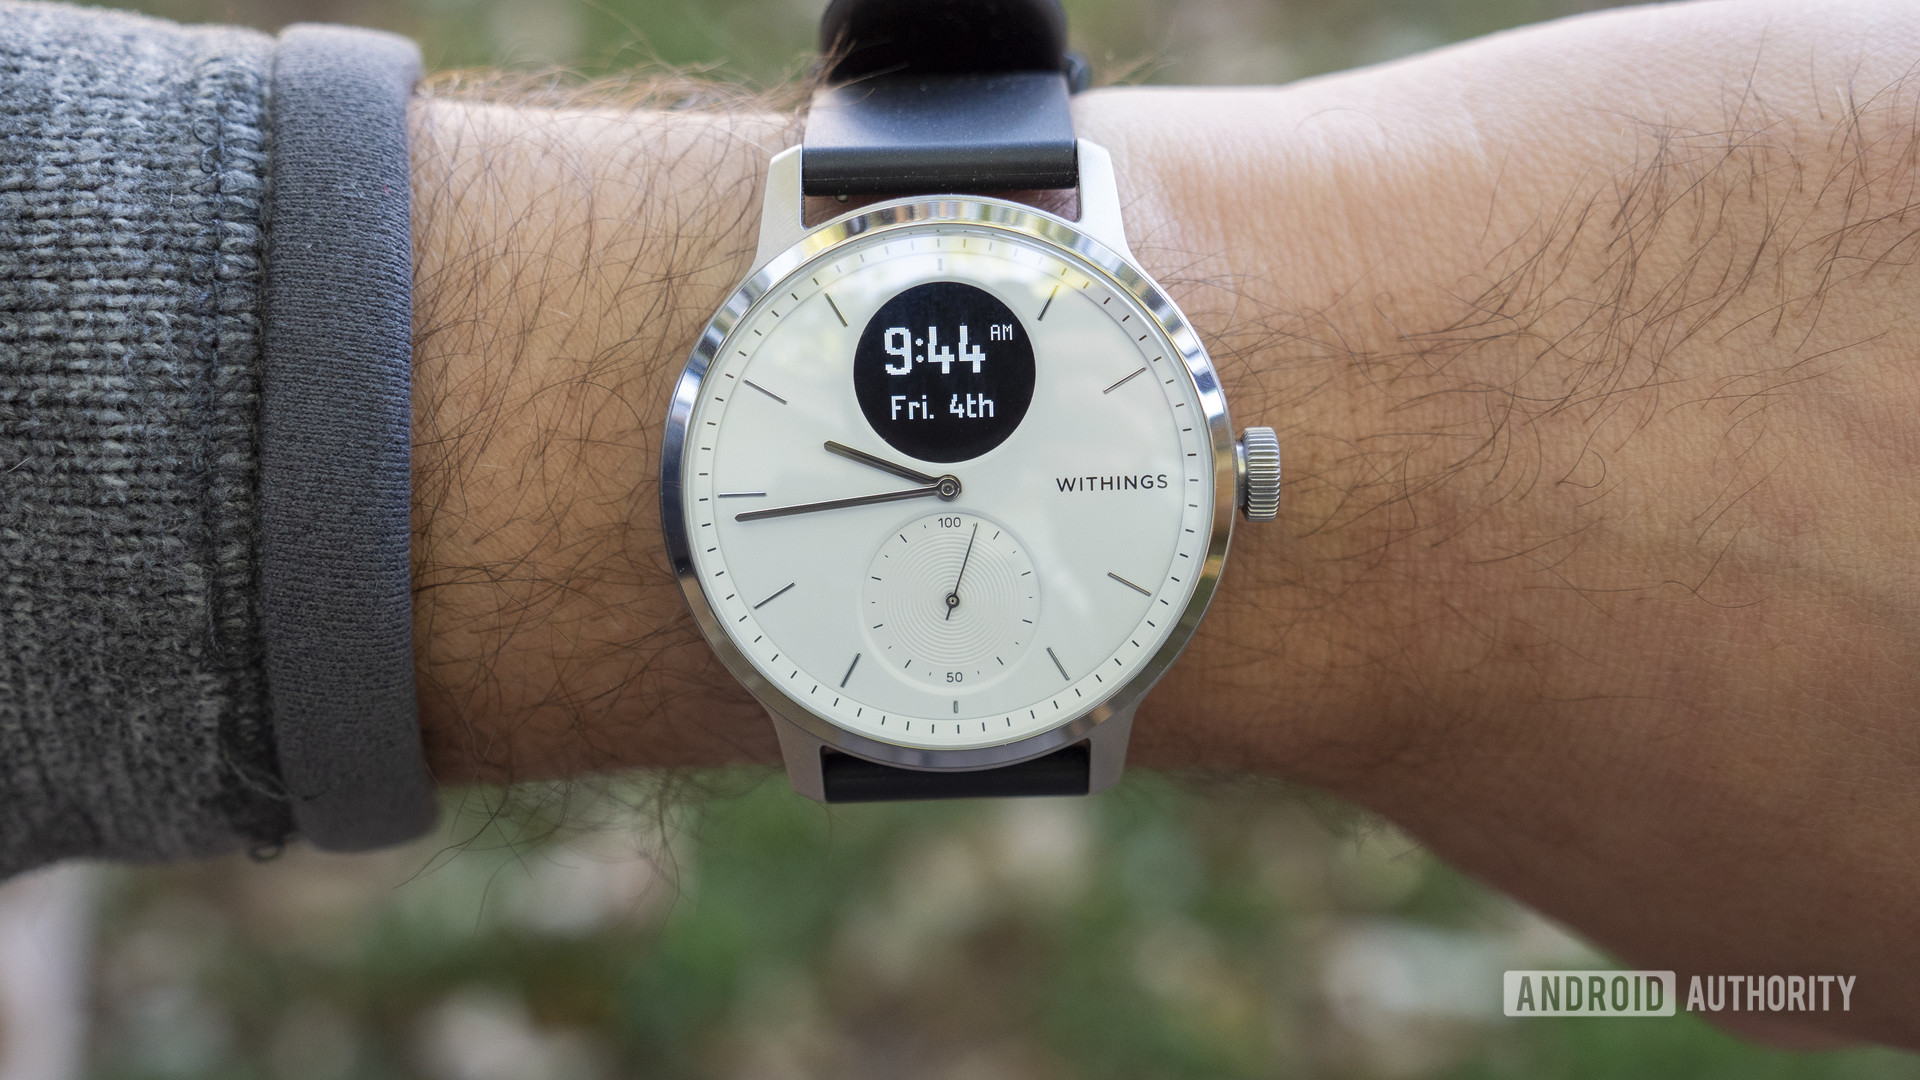 A user models the Withings Scanwatch on their wrist, displaying the device's clock face.